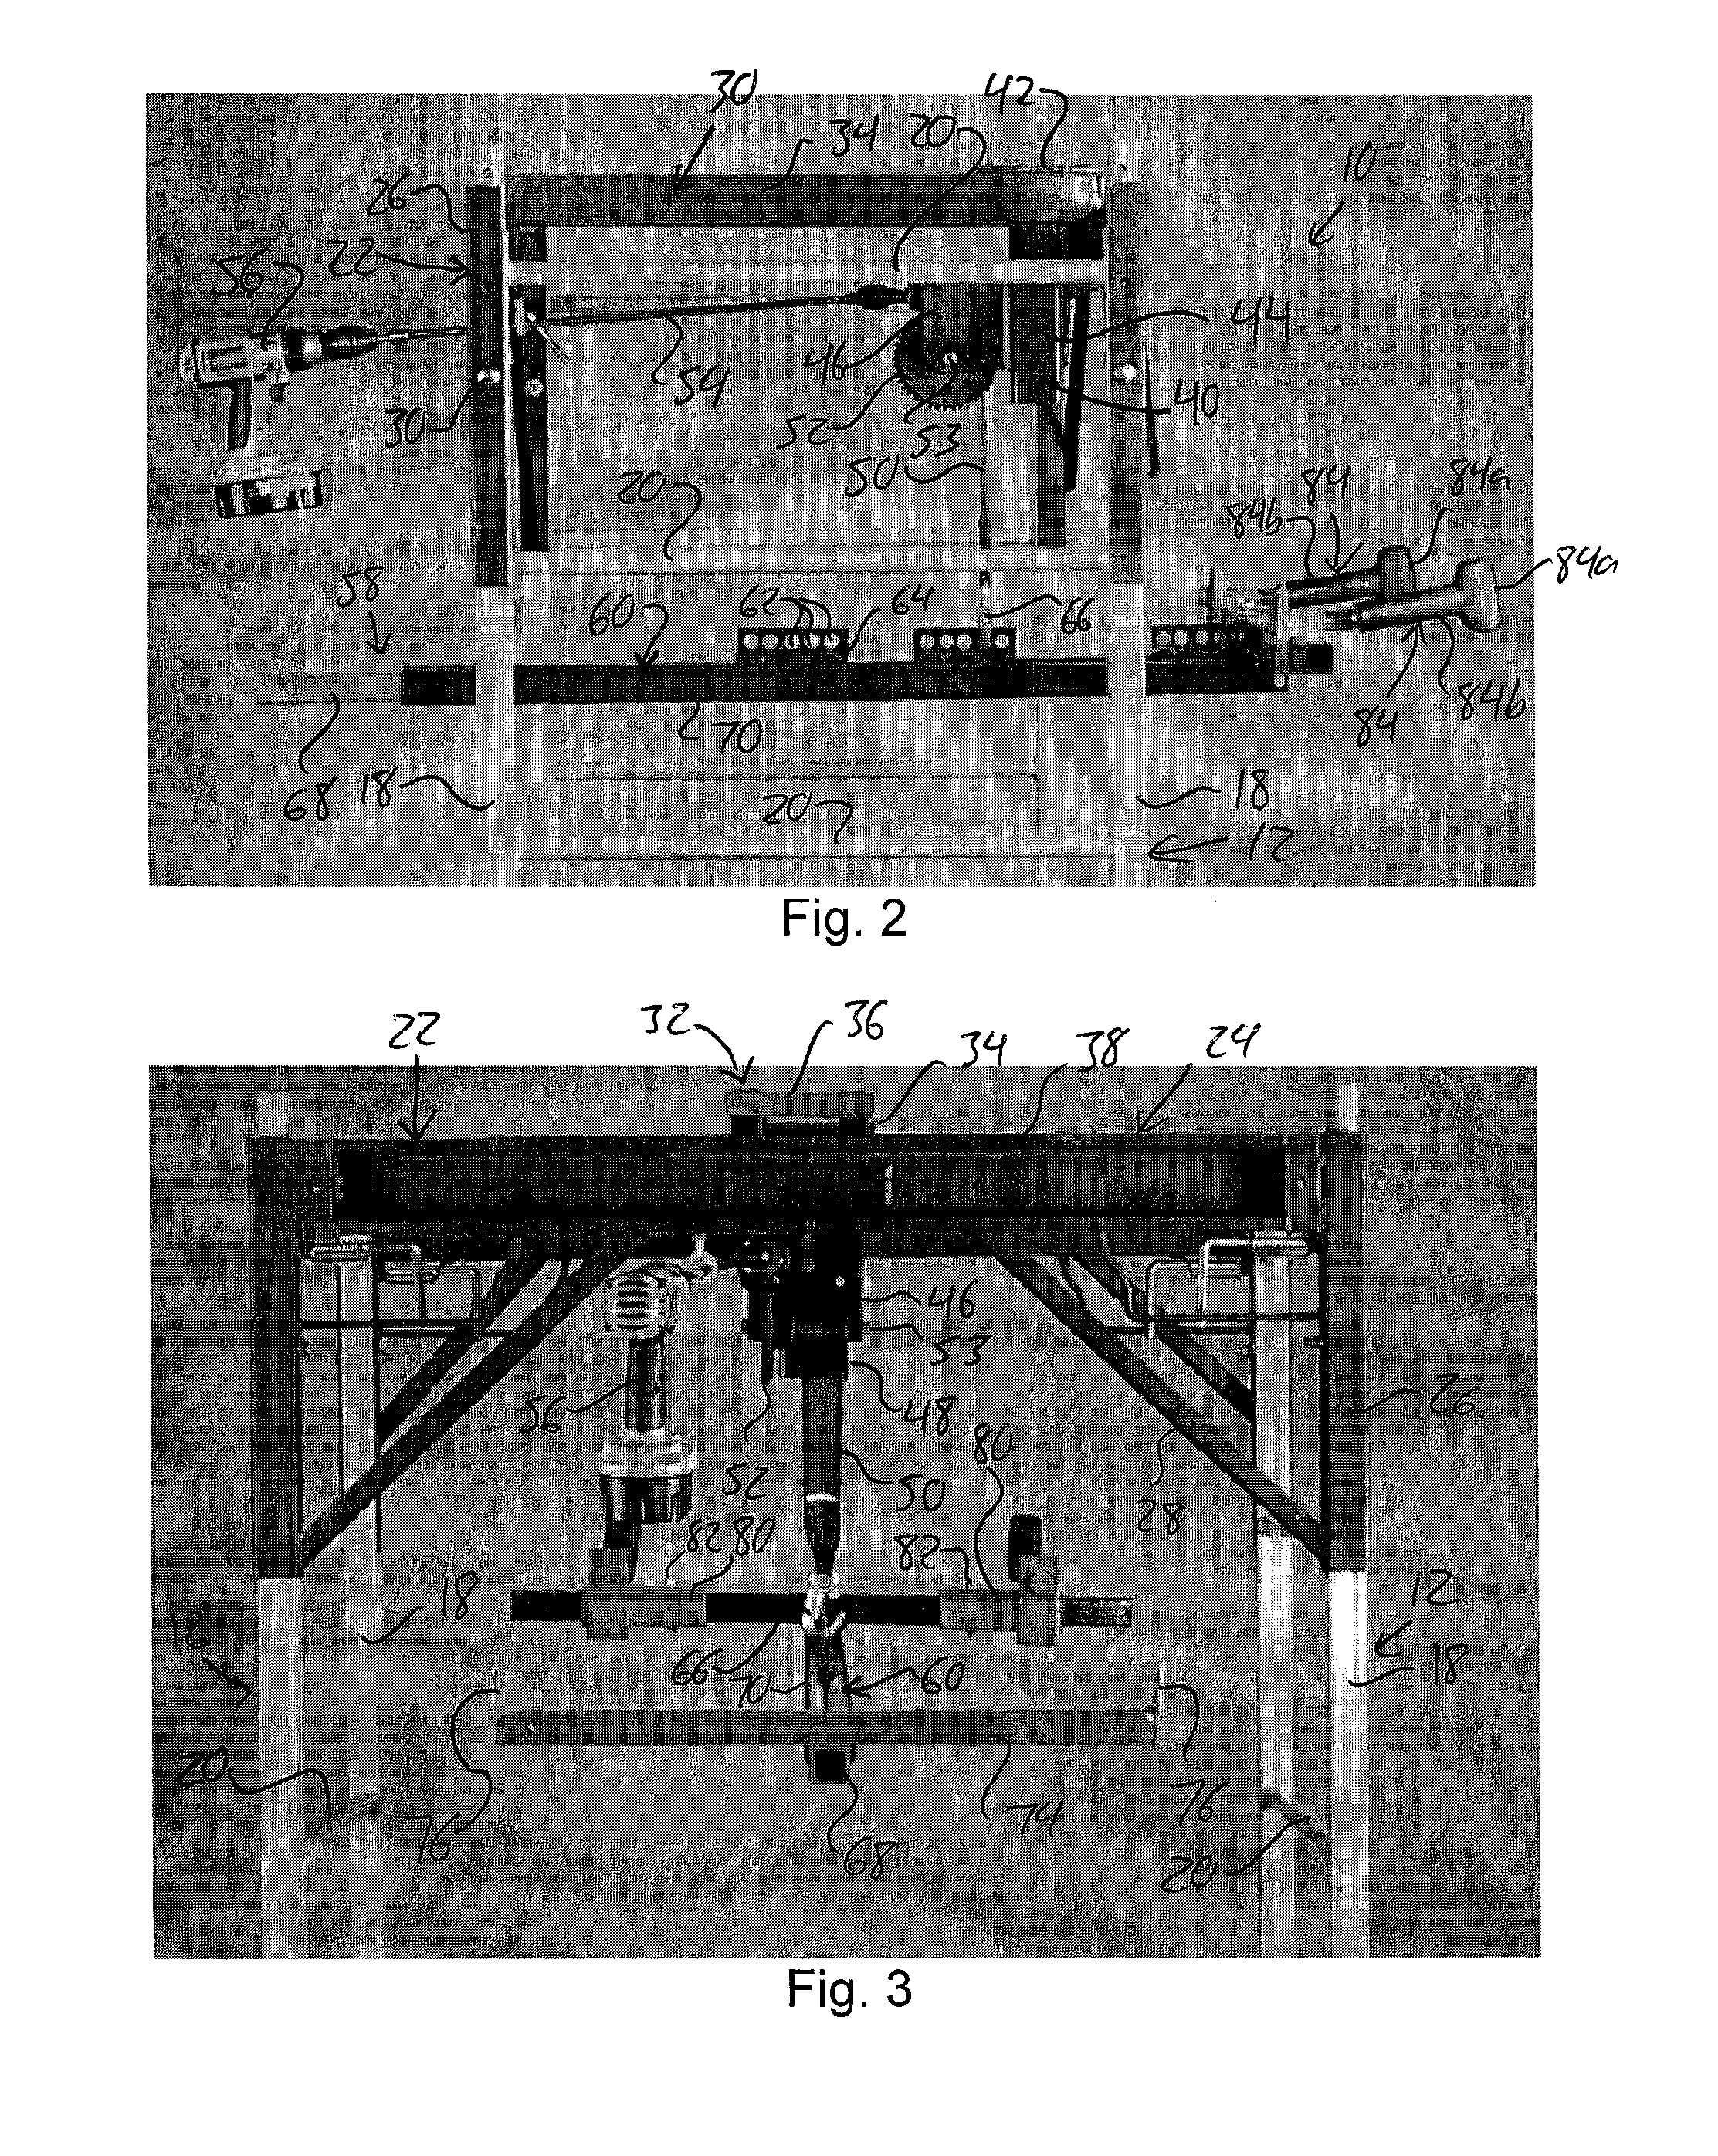 Method and Apparatus for Lifting and Transporting Exercise Equipment